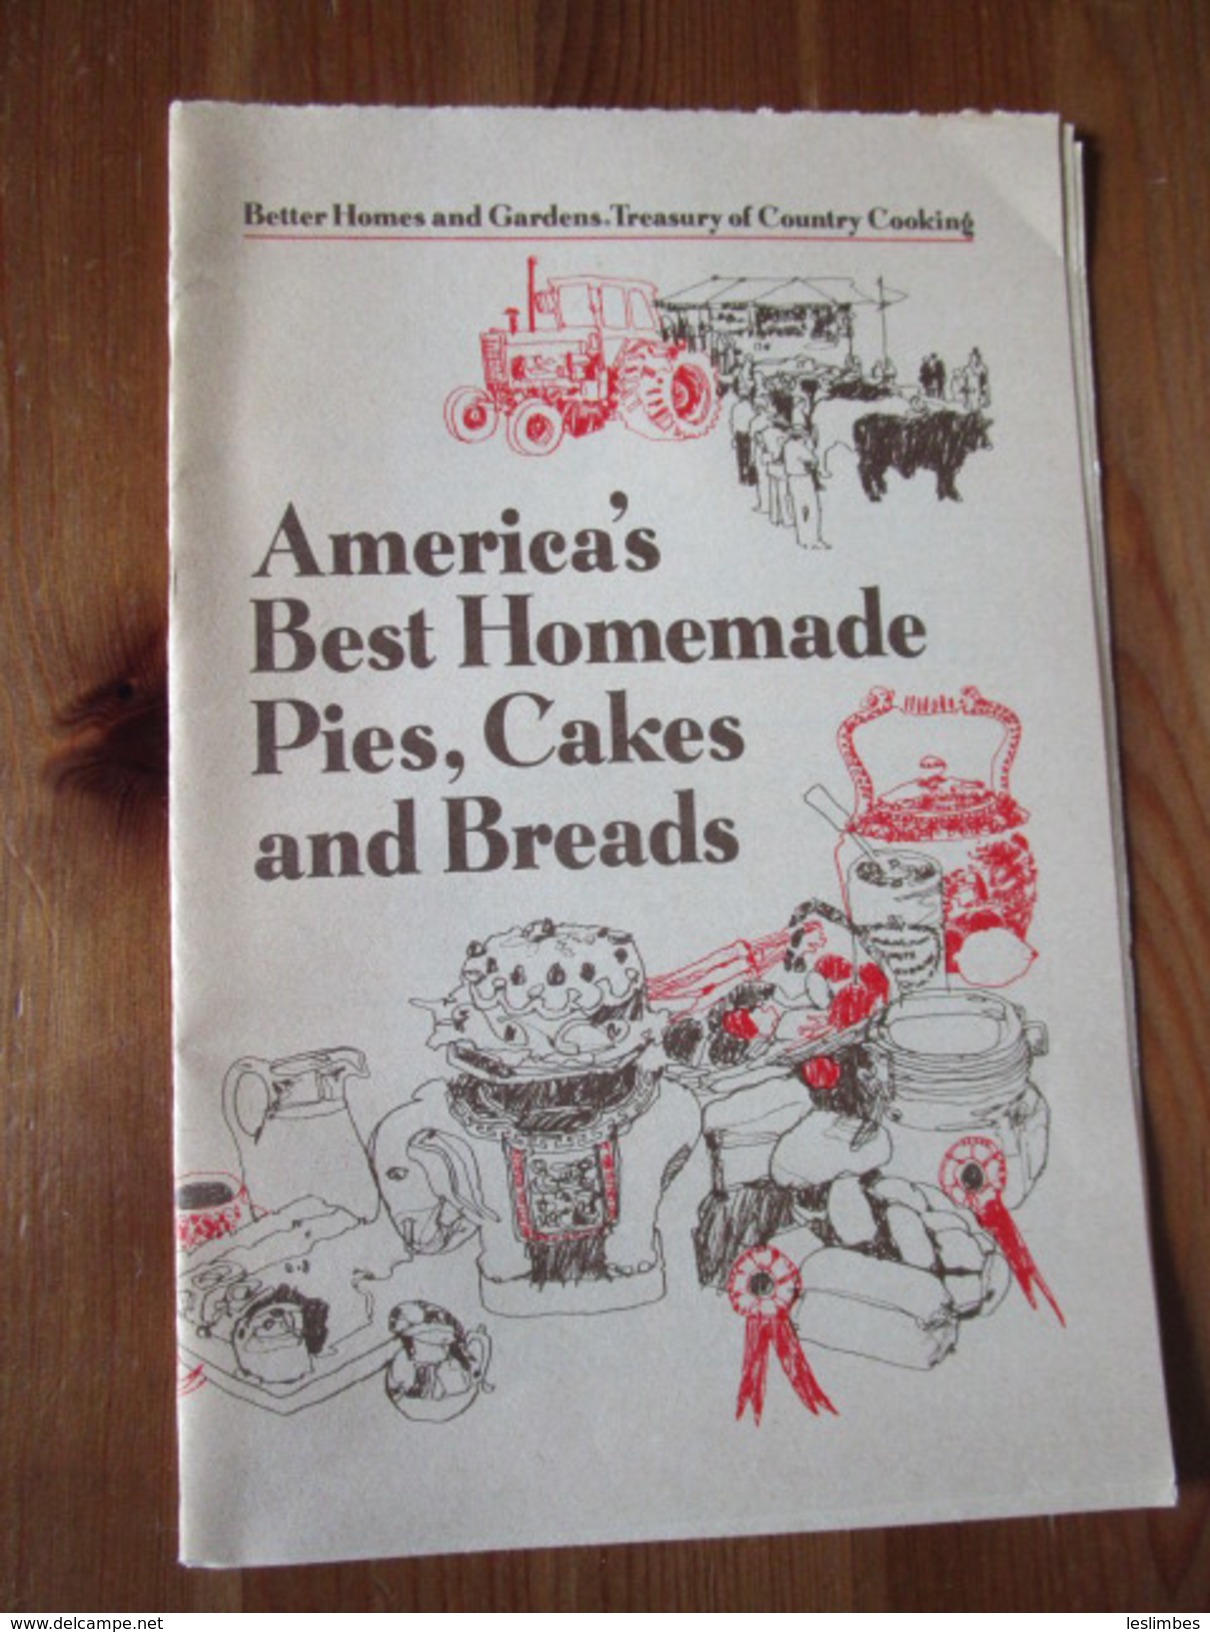 Better Homes And Gardens Treasury Of Country Cooking: America's Best Homemade Pies, Cakes And Breads - Americana